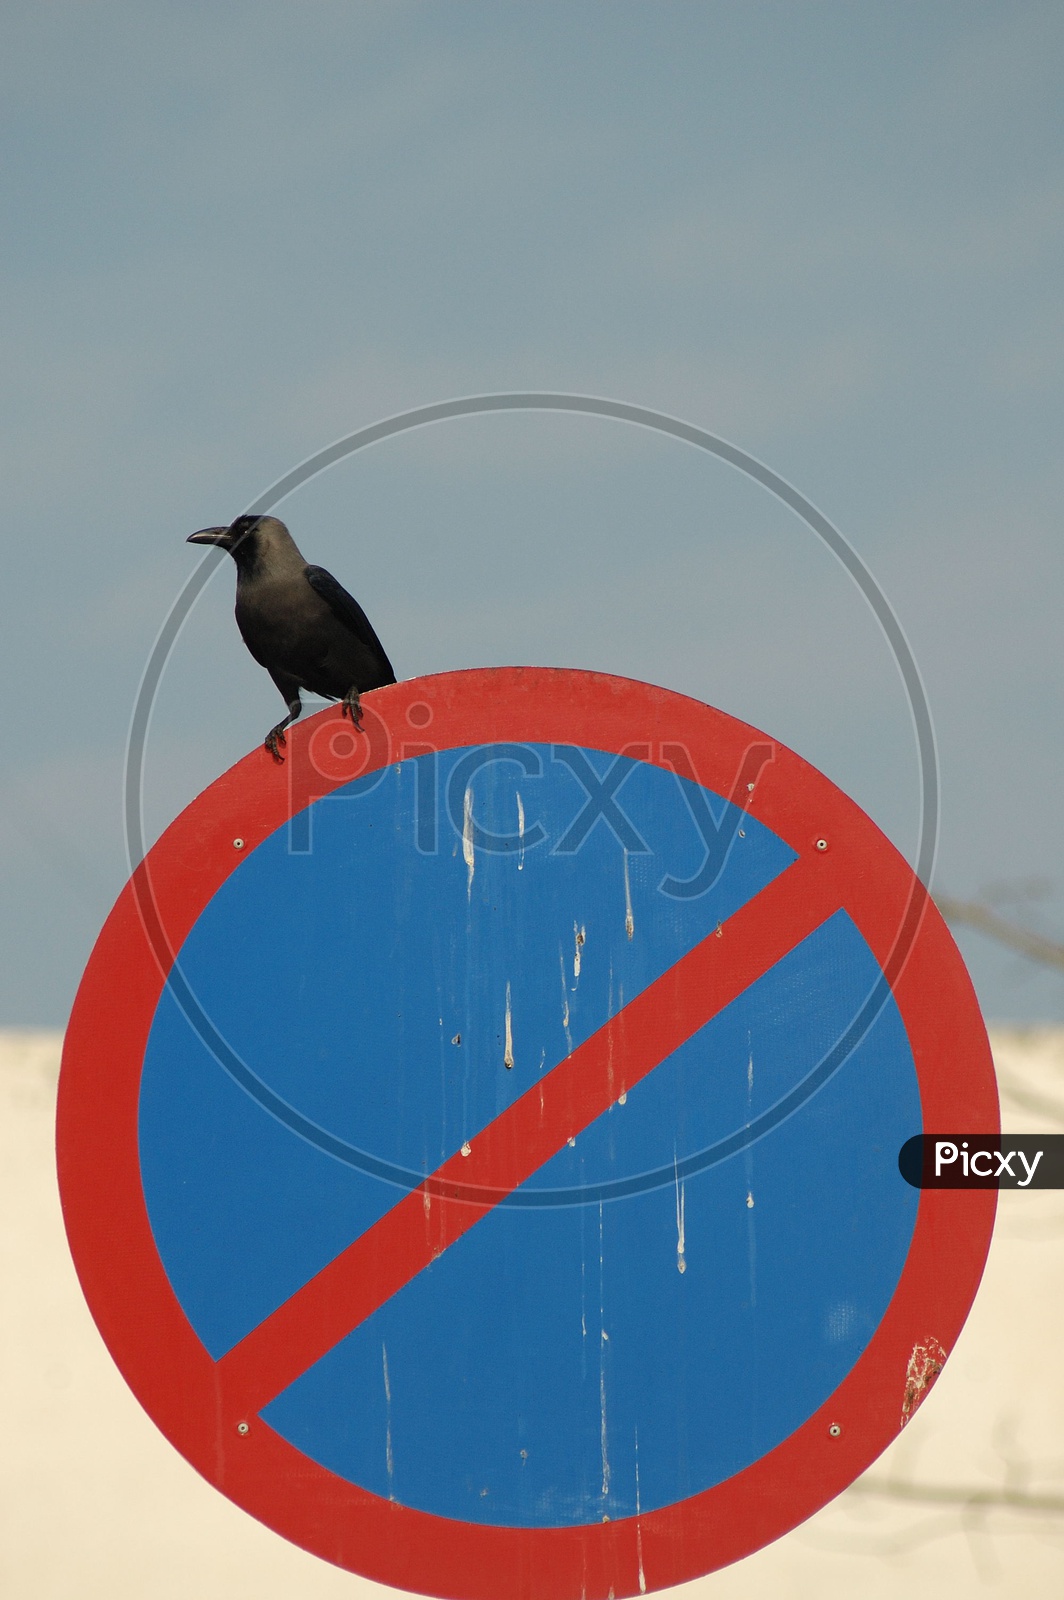 A crow on a 'no parking' sign board